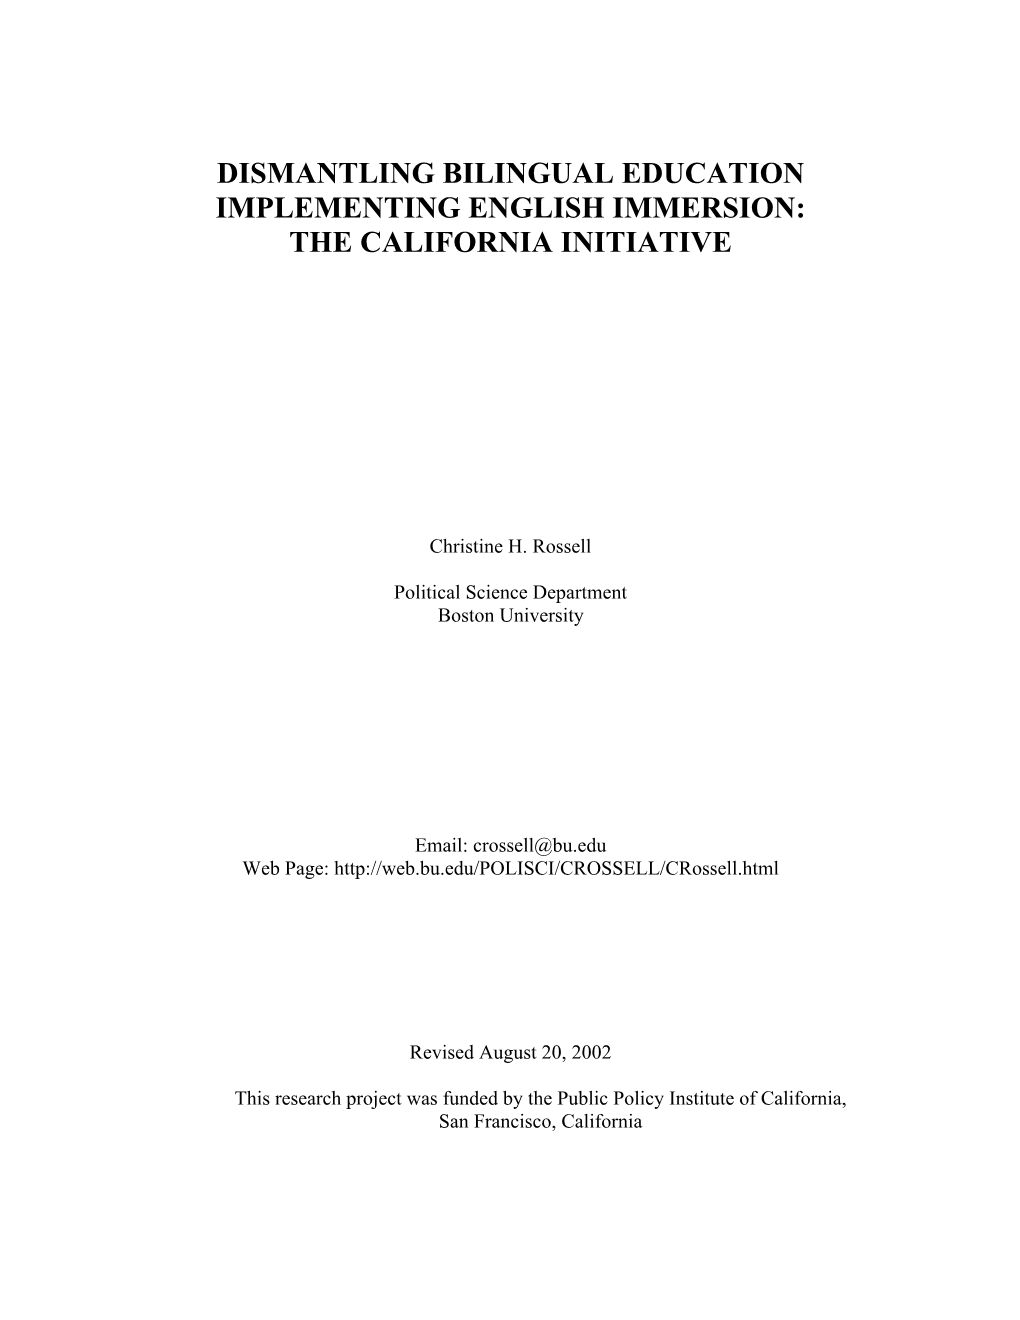 Dismantling Bilingual Education Implementing English Immersion: the California Initiative